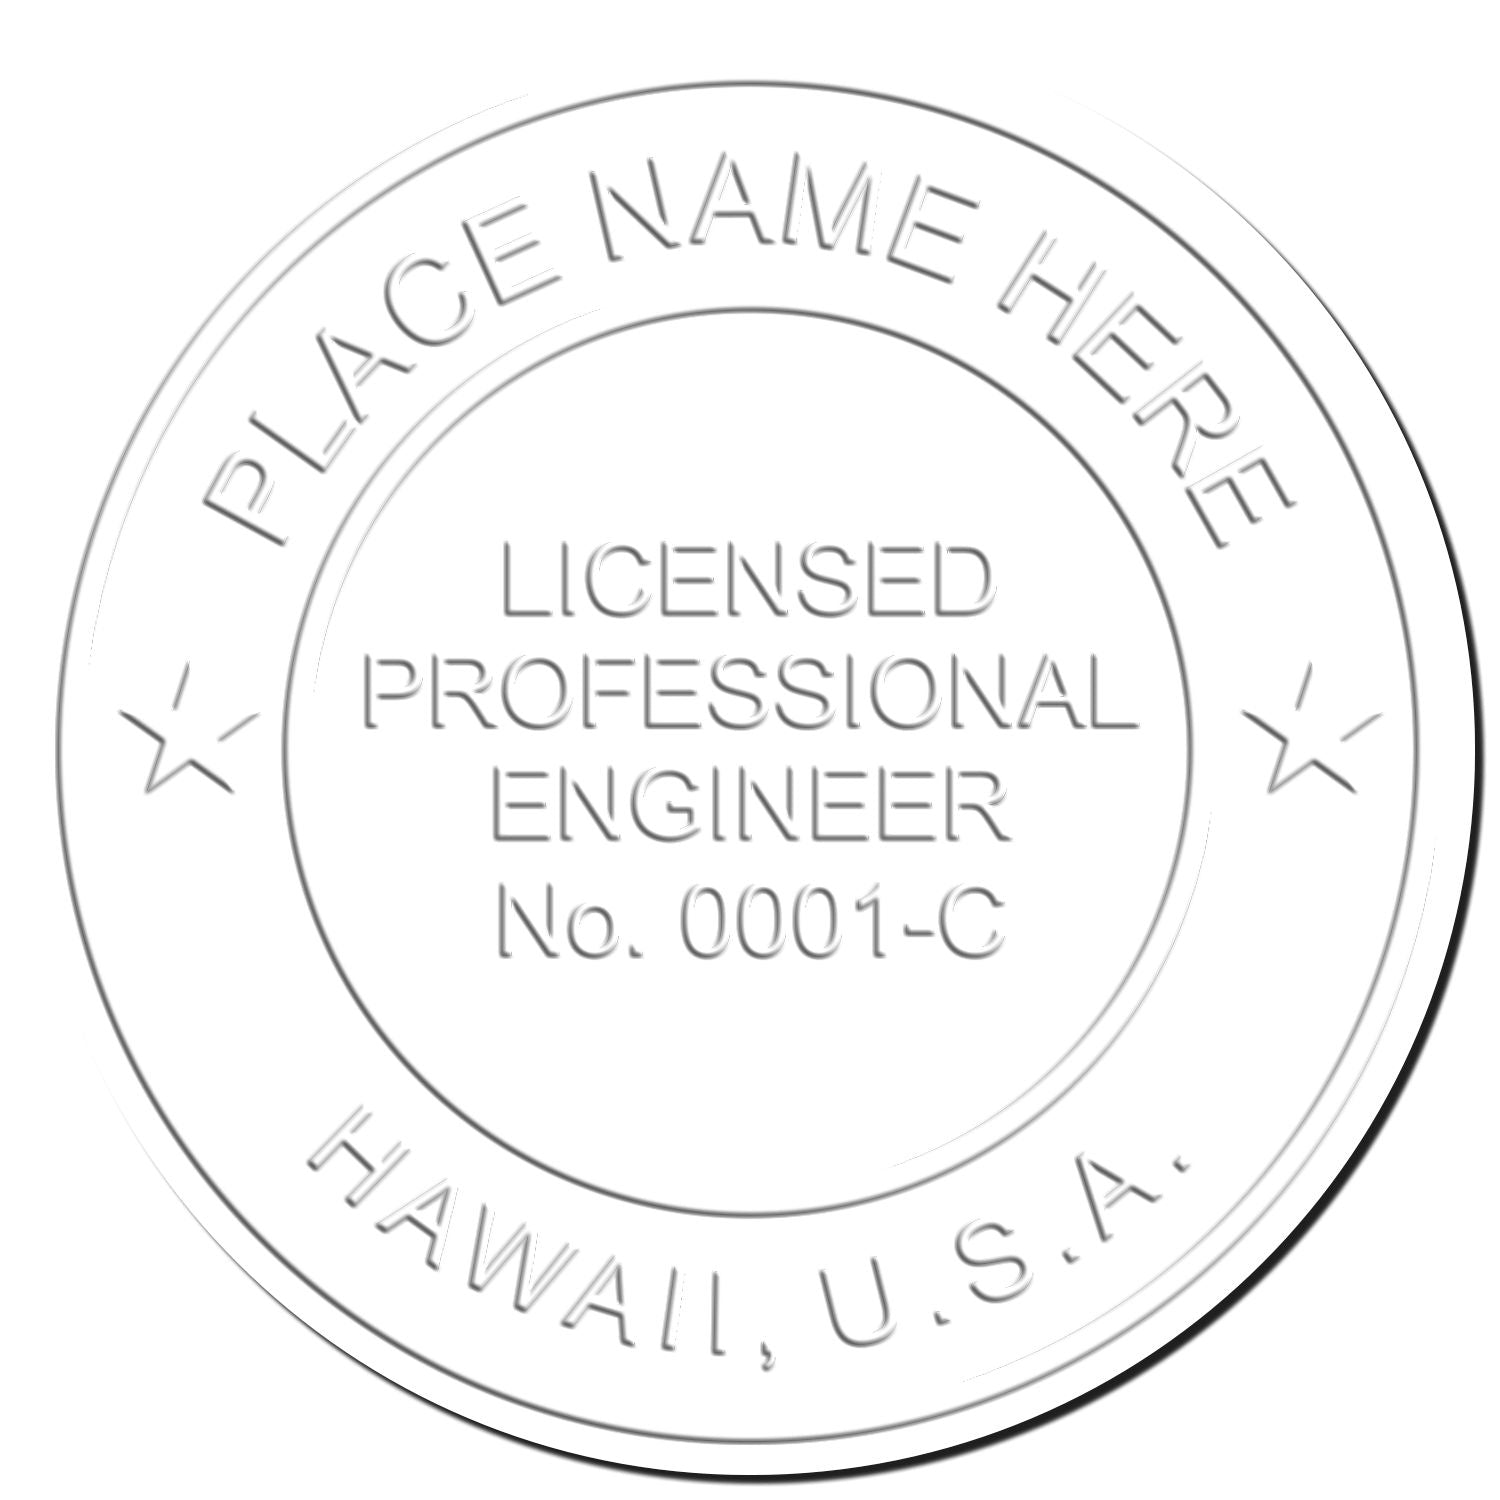 The main image for the Hawaii Engineer Desk Seal depicting a sample of the imprint and electronic files